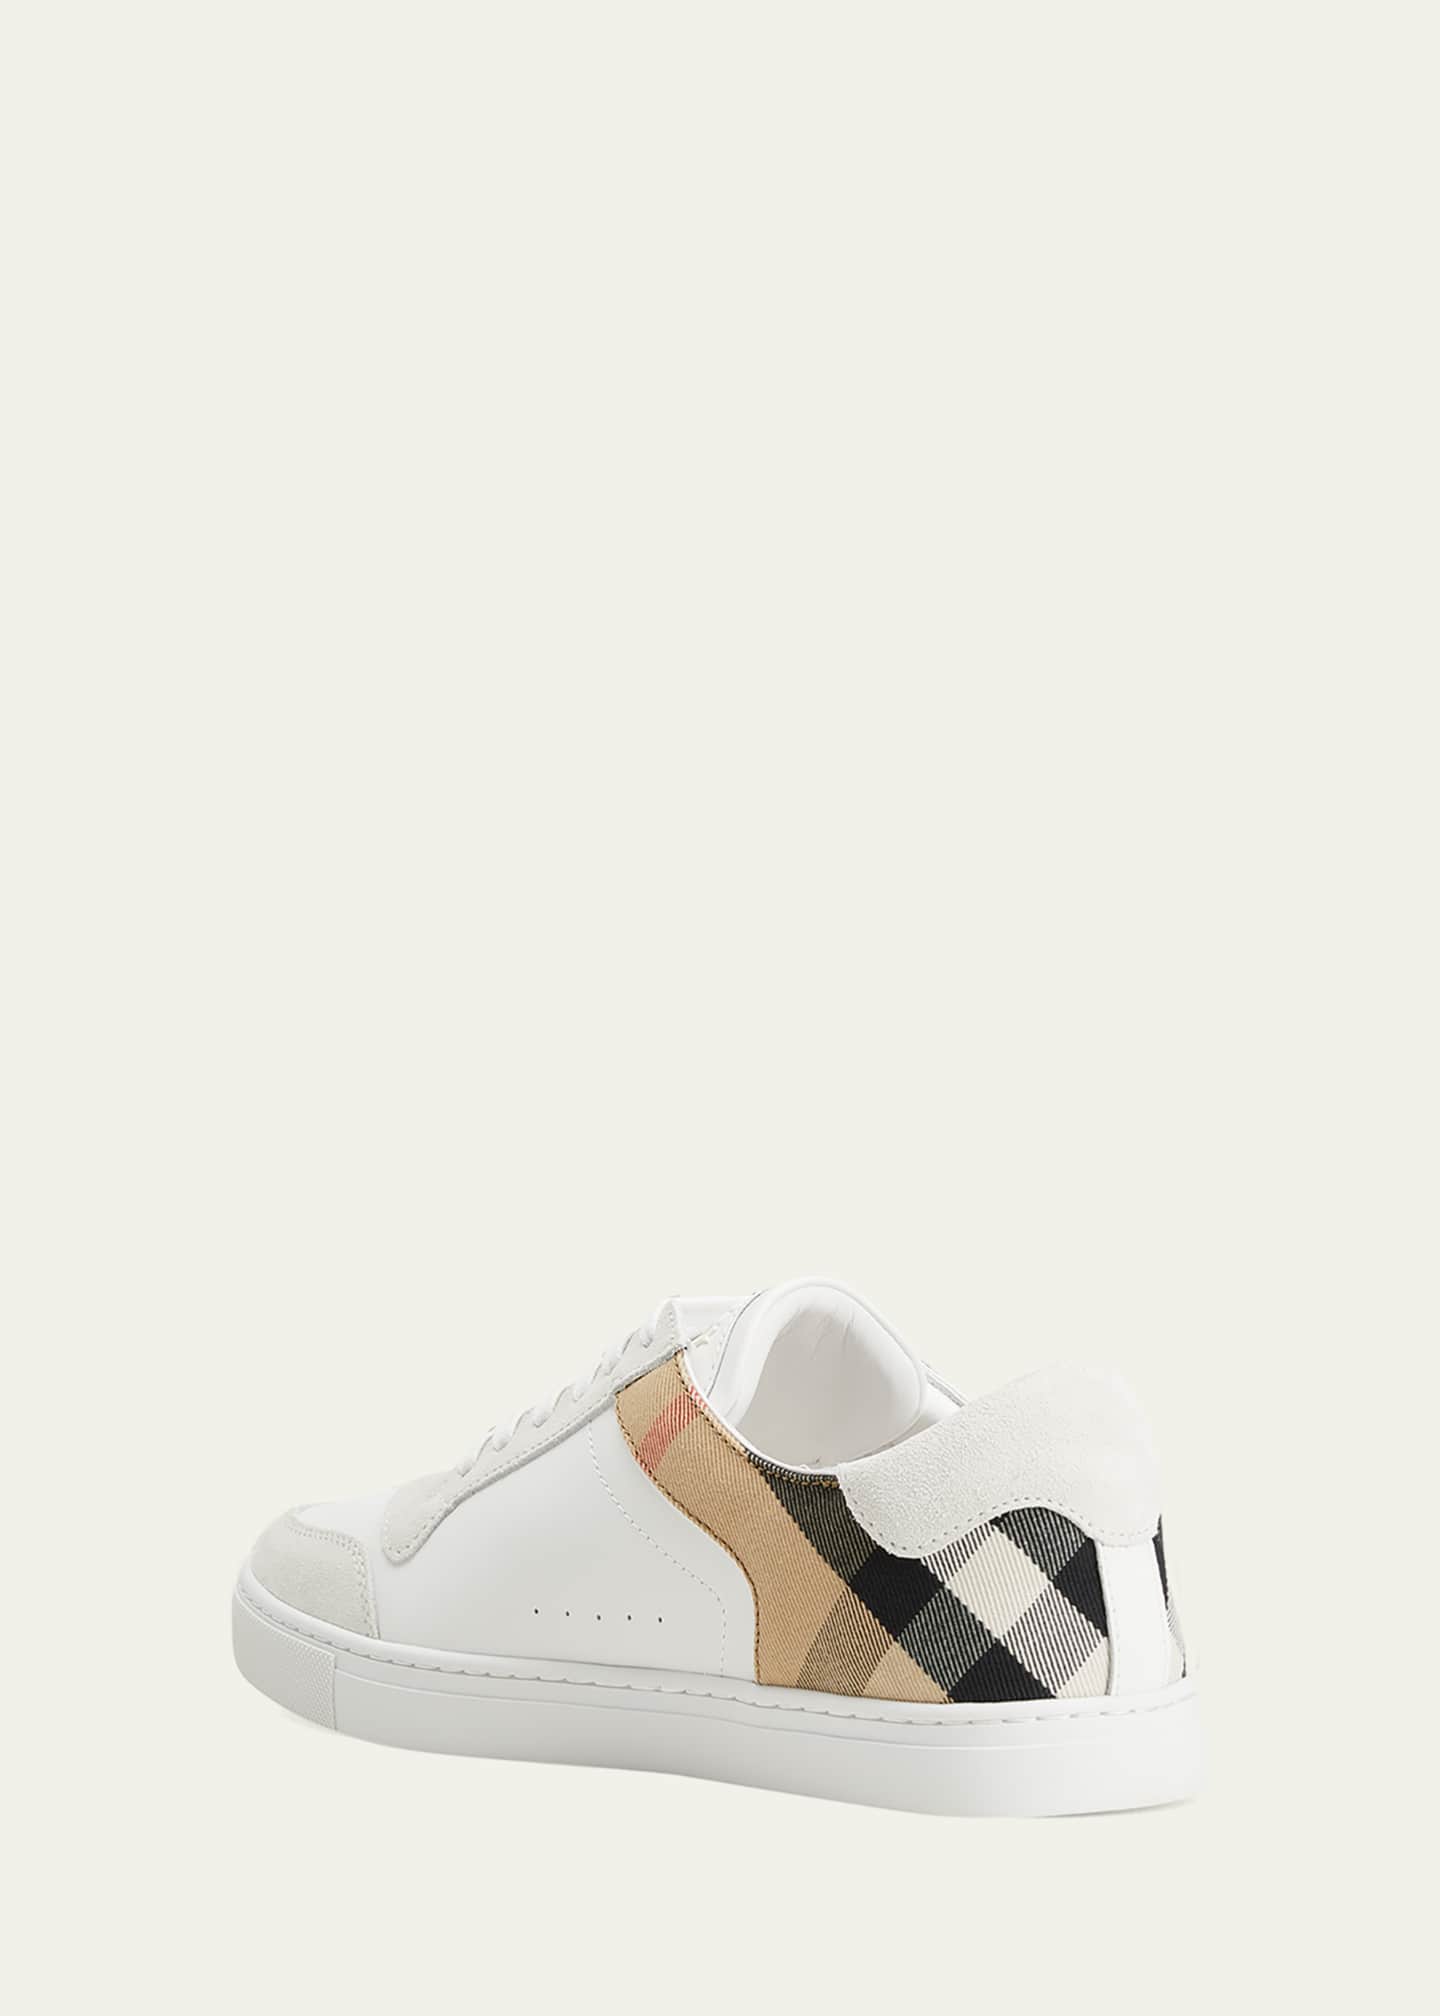 Burberry Men's Reeth Leather House Check Low-Top Sneakers, White - Bergdorf  Goodman